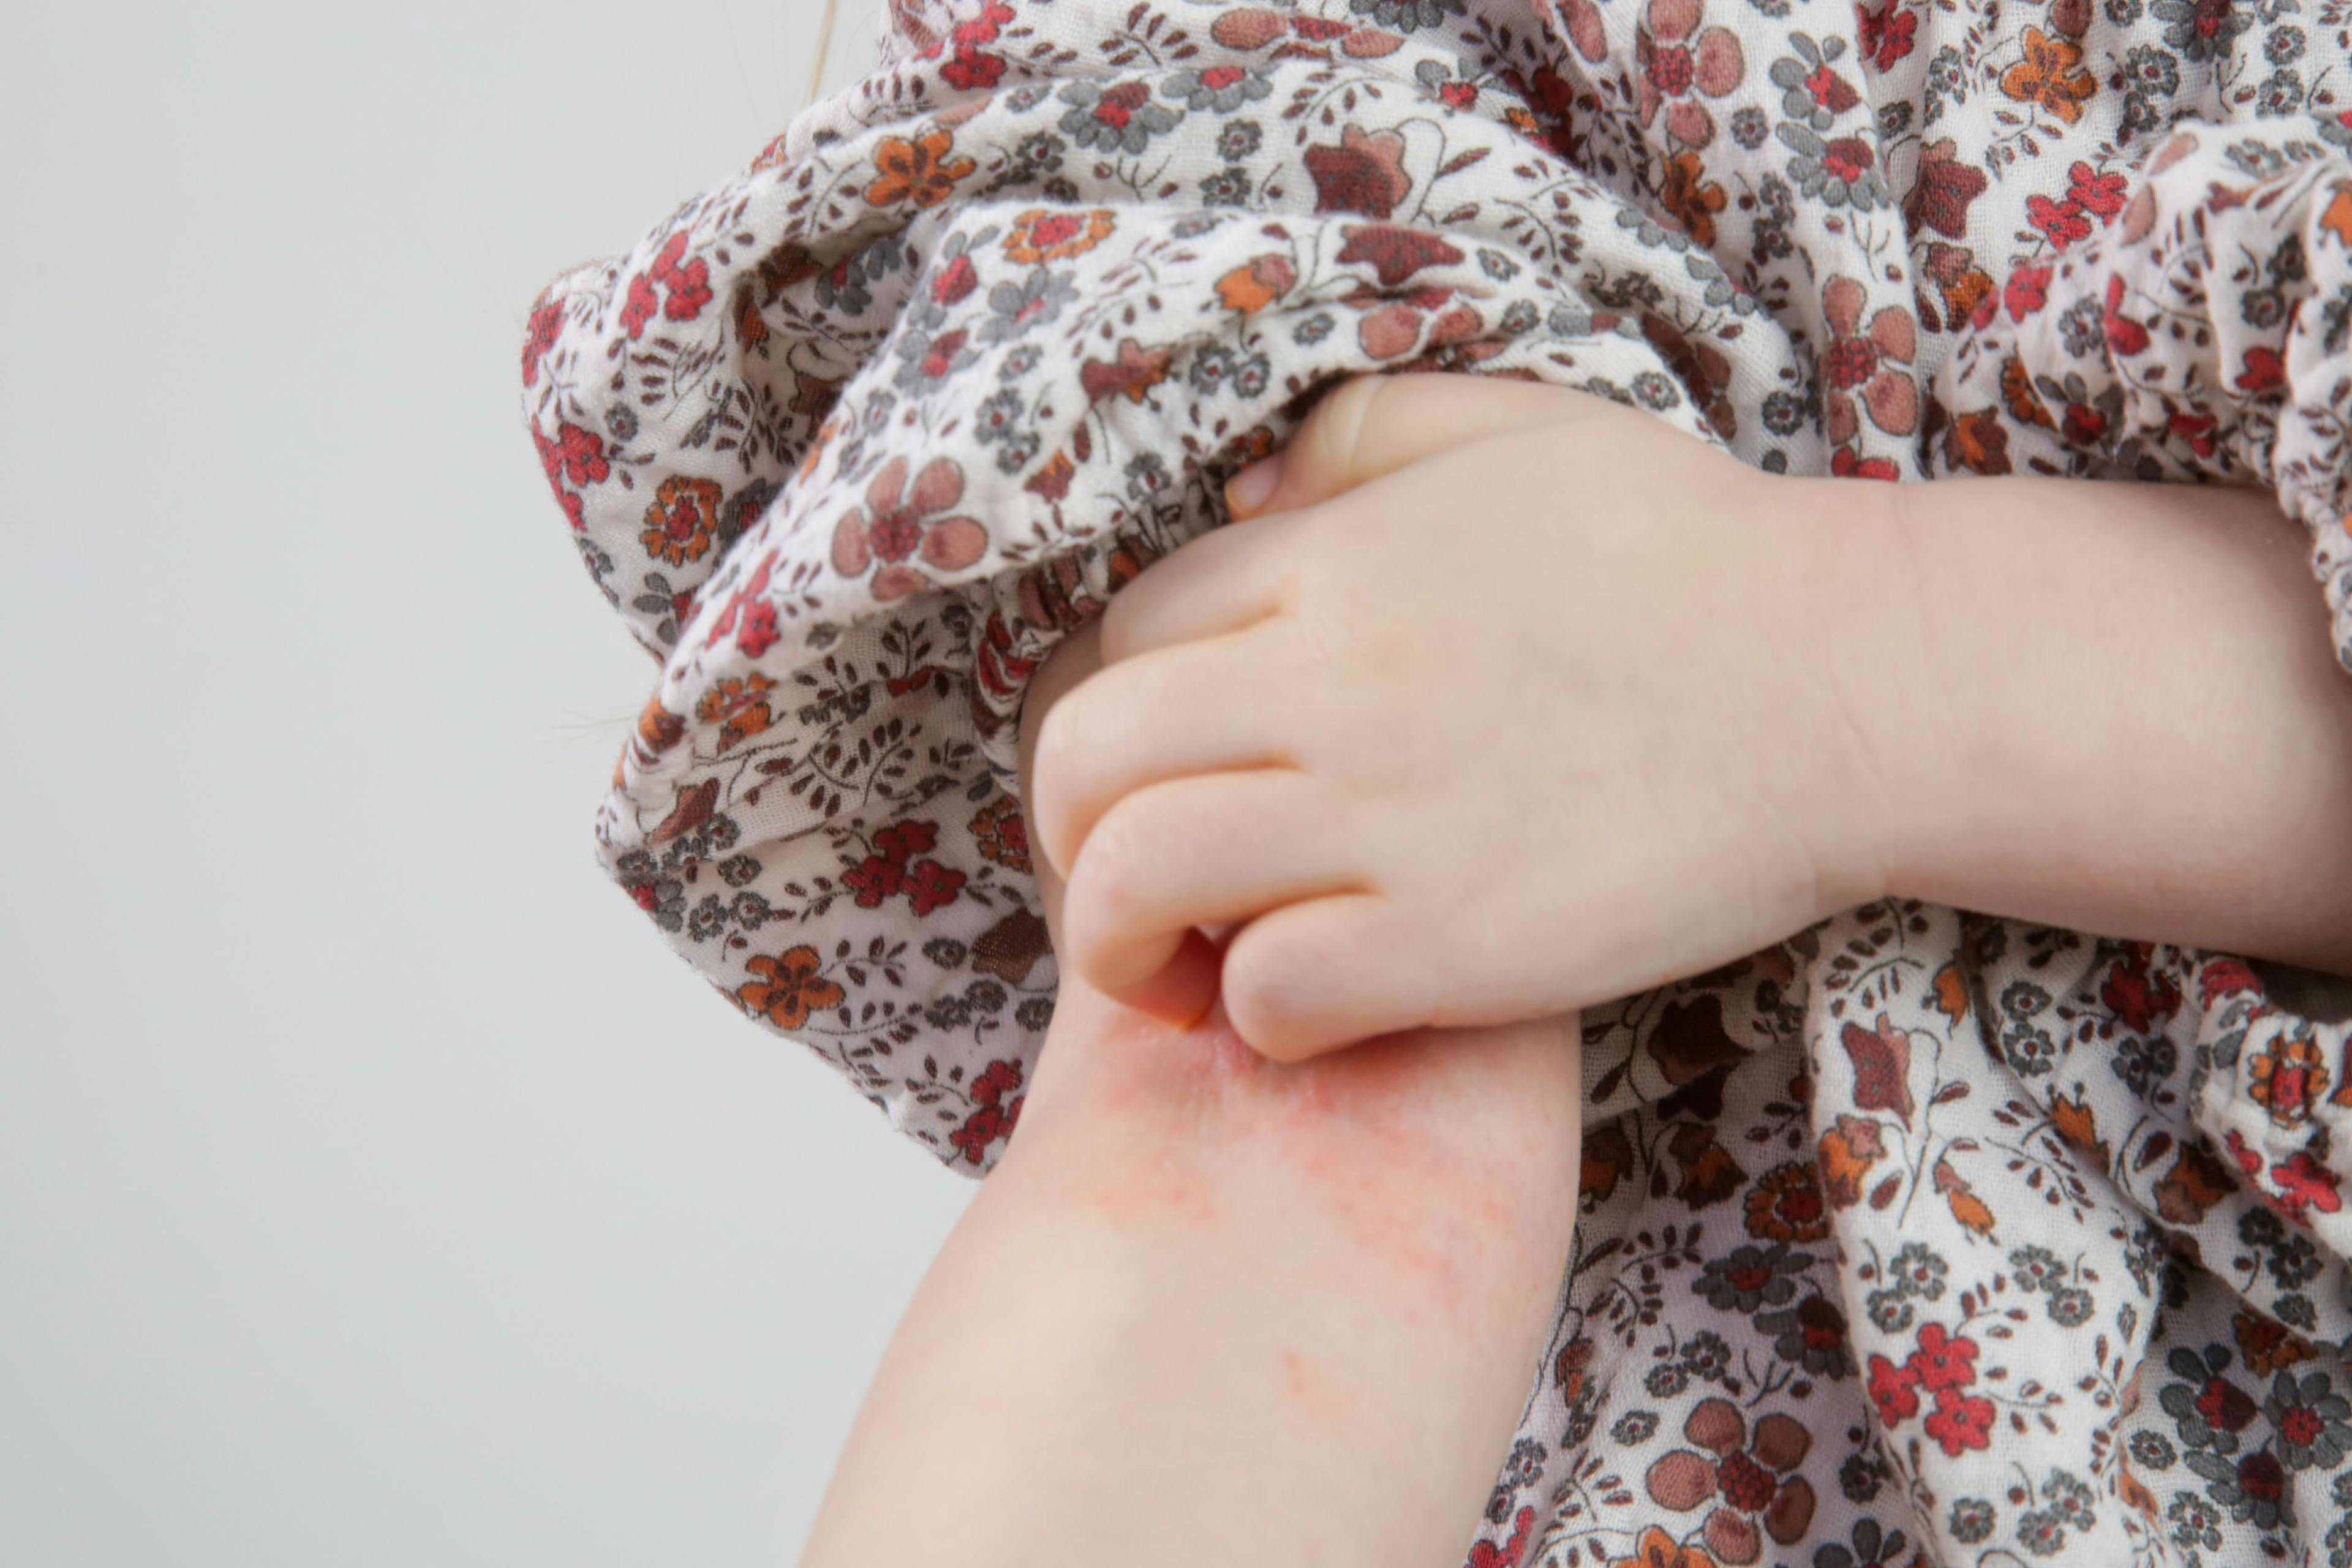 Atopic Dermatitis and Allergic Contact Dermatitis Overlap in Children. Why Patch Testing to Tell Them Apart Is Important